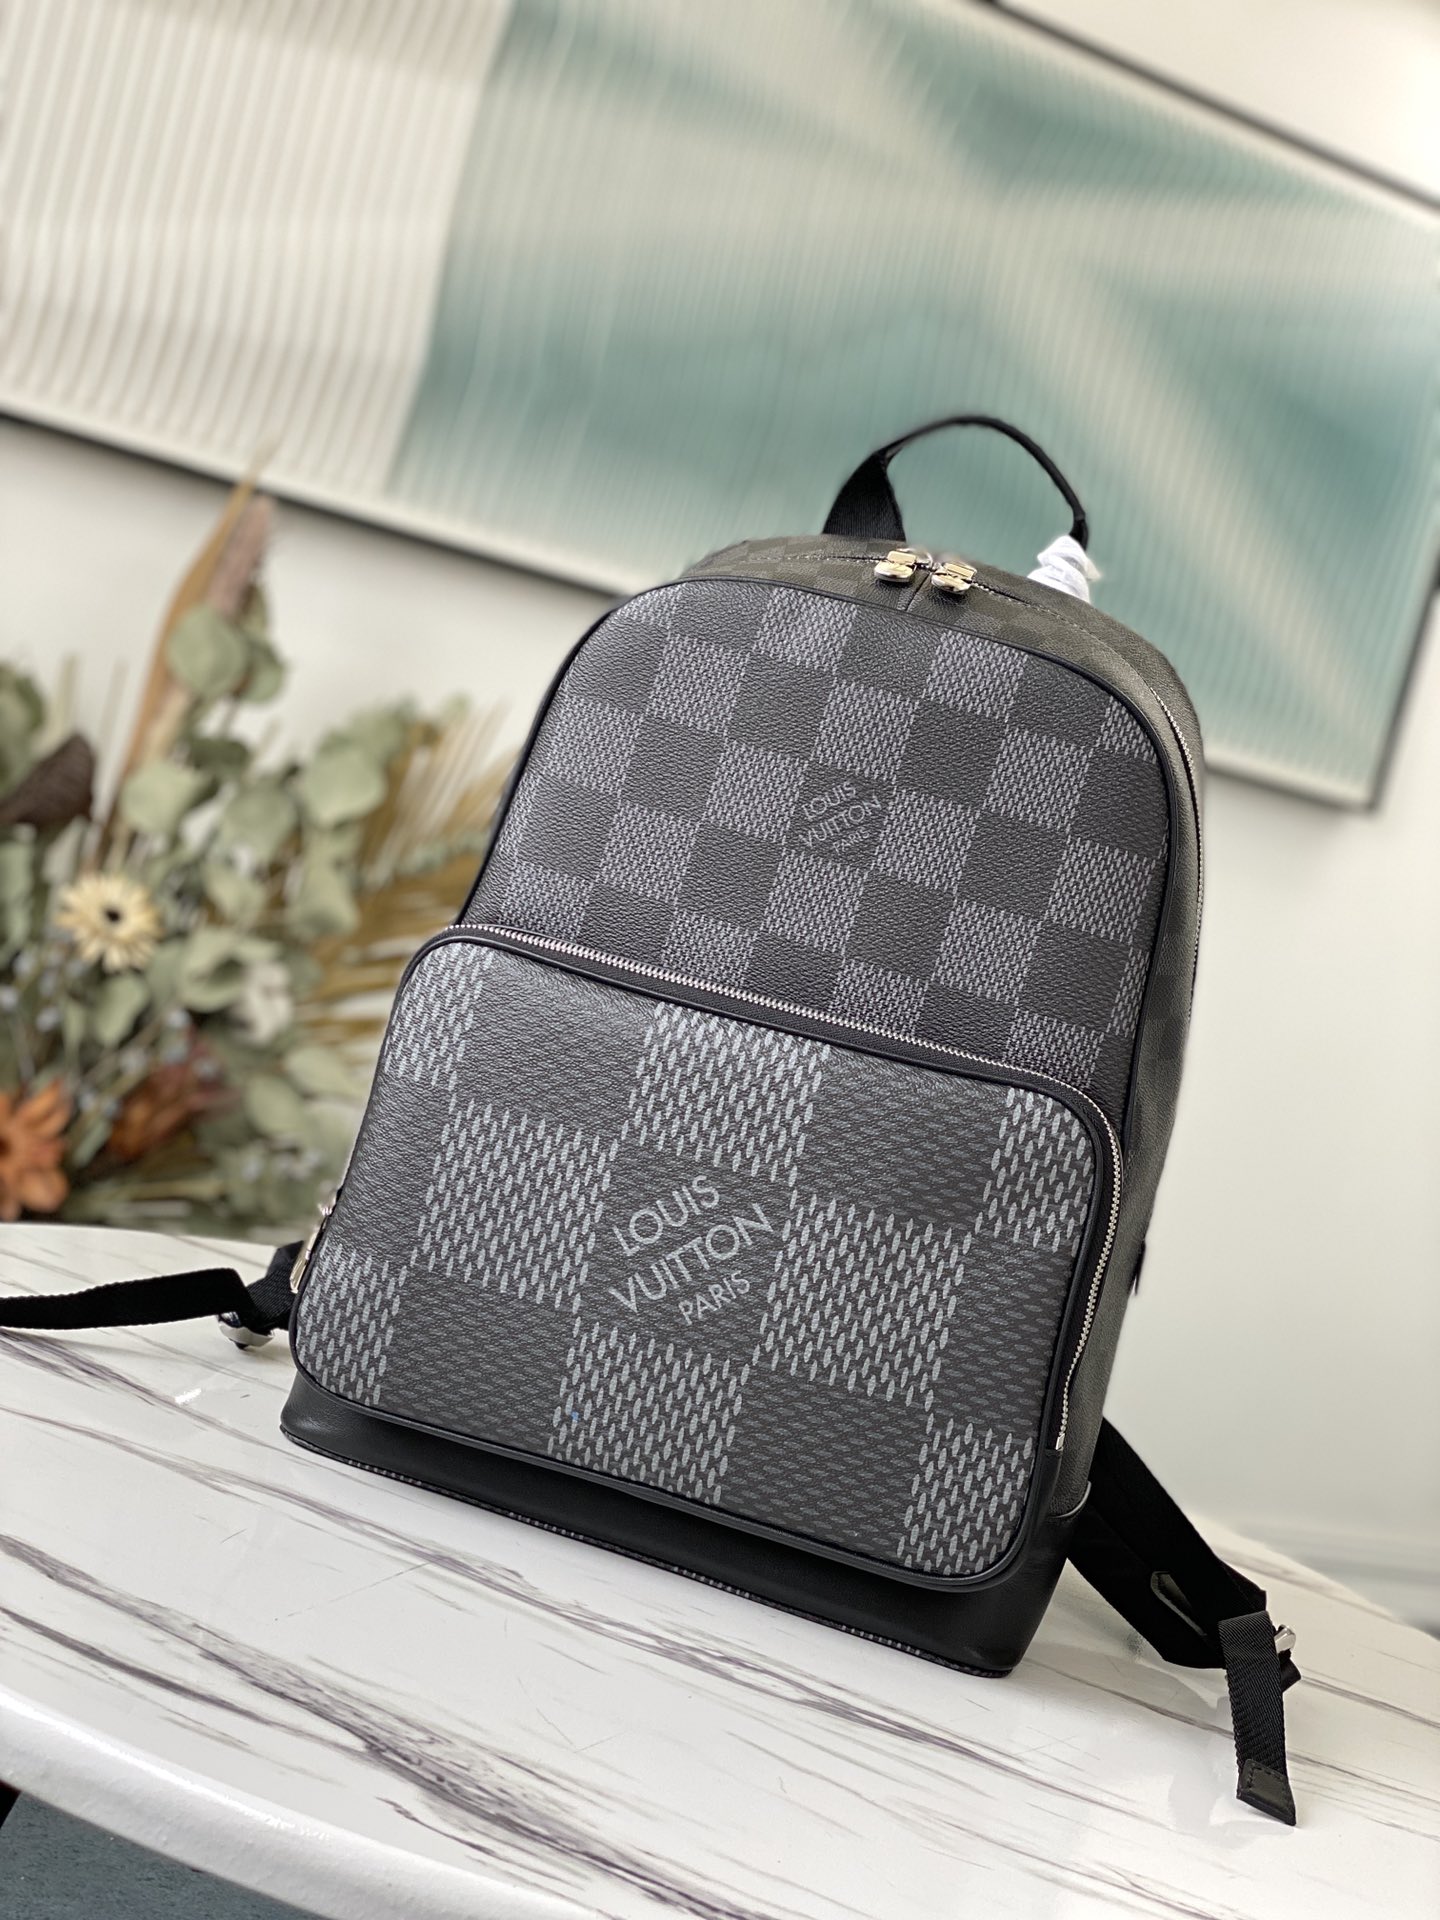 Louis Vuitton Campus backpack (N50009)  Campus backpack, Backpacks, Louis  vuitton